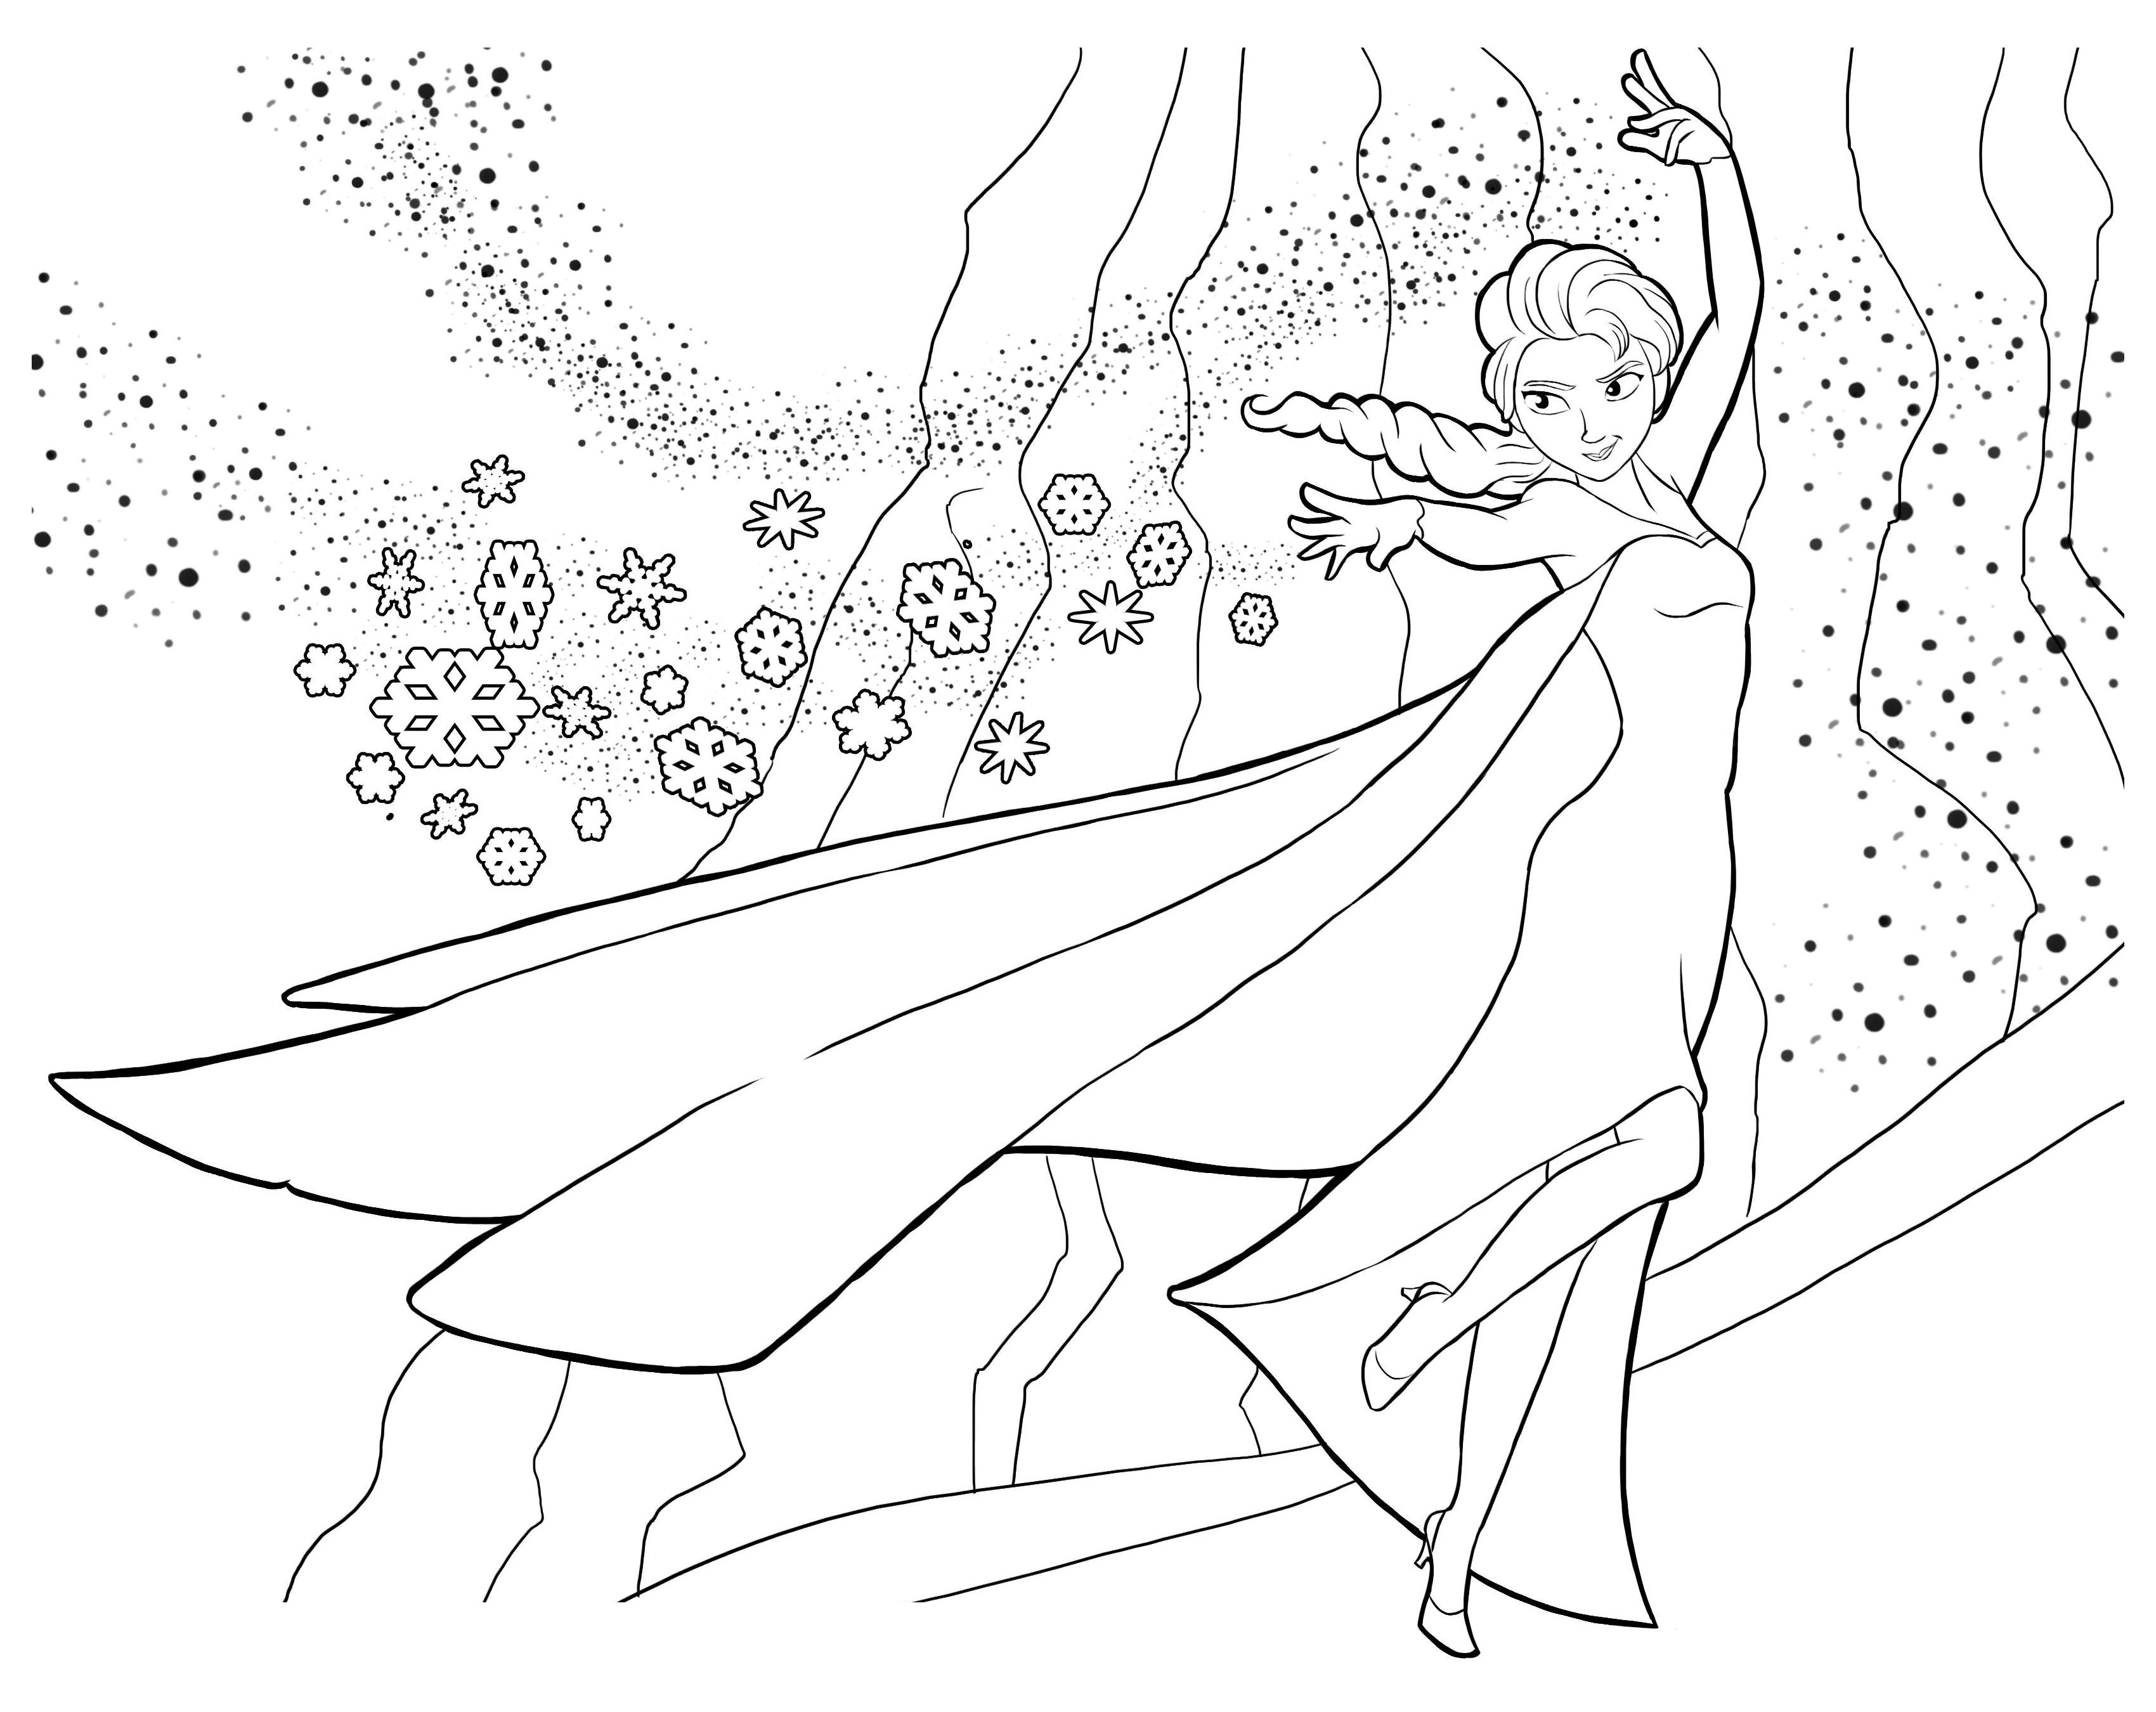 Funny Frozen coloring page for kids : Elsa creating ice and snow